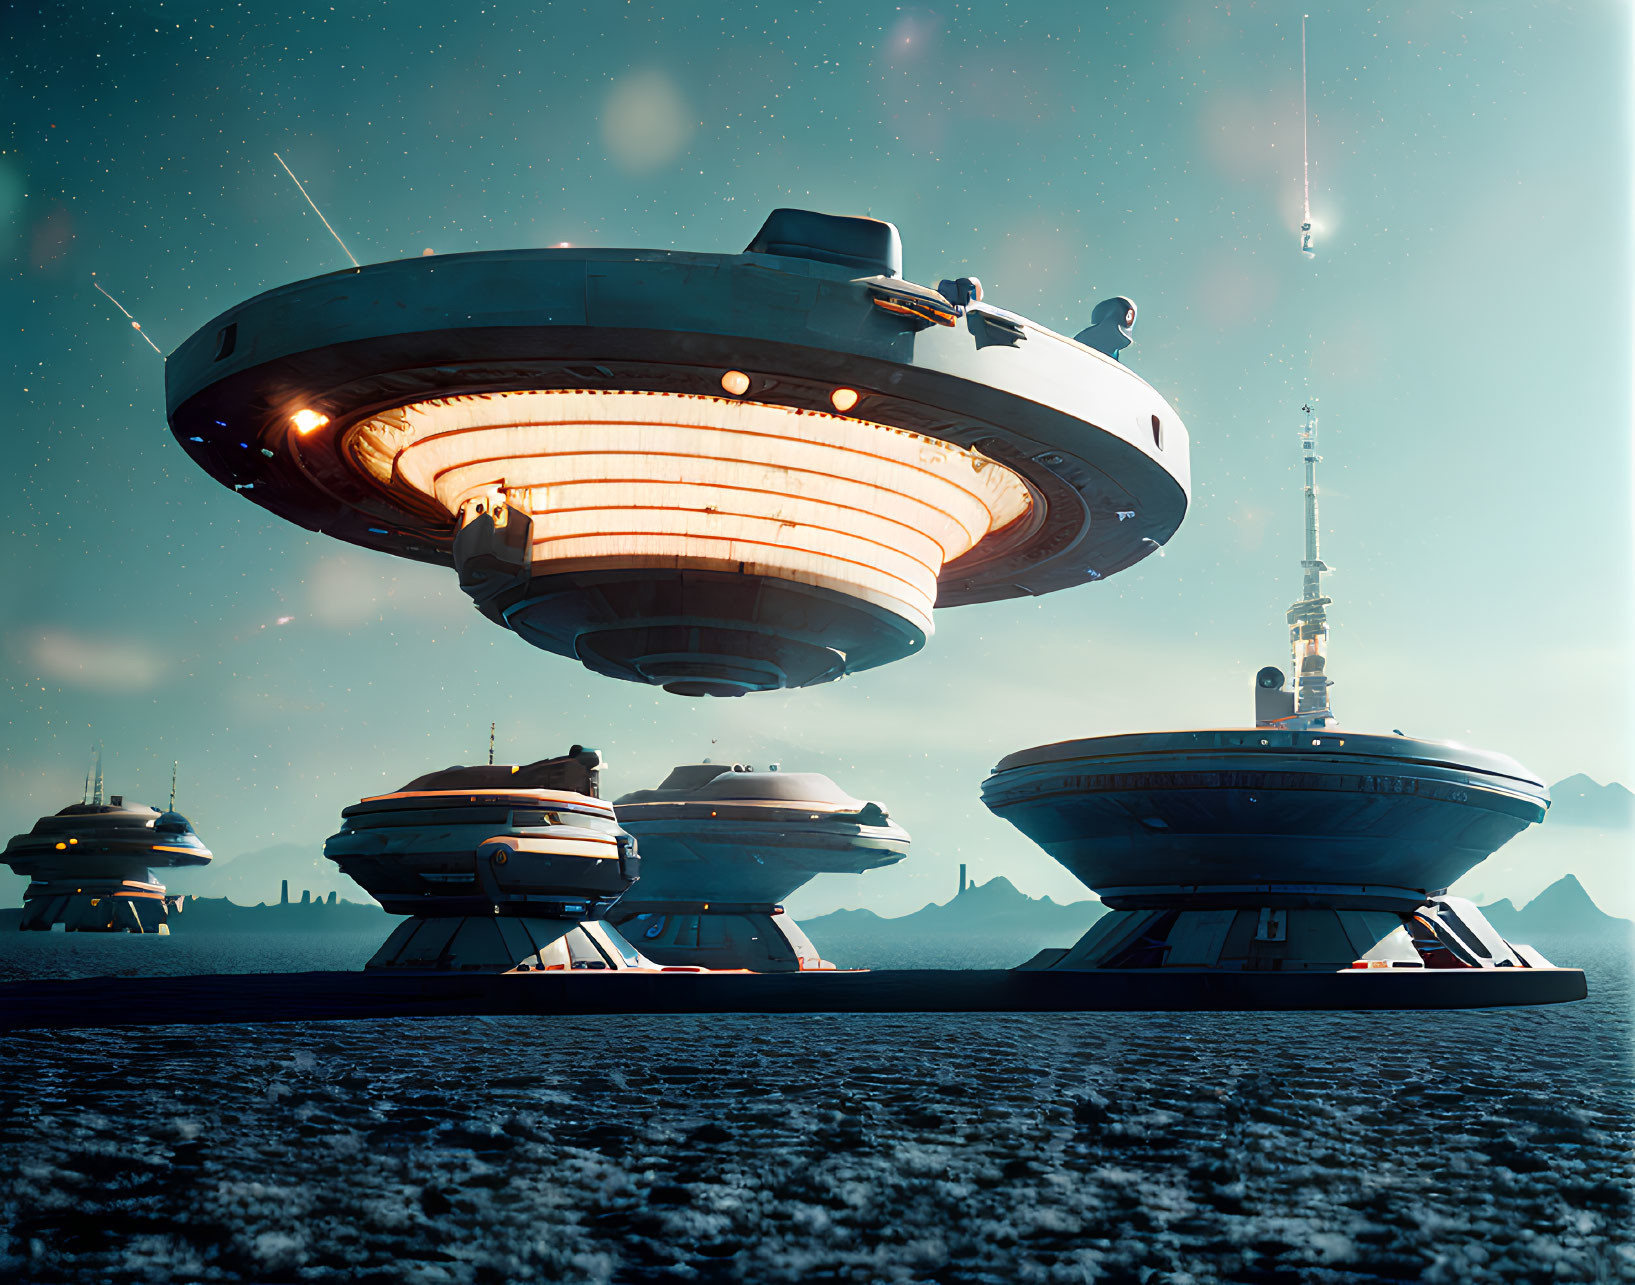 Futuristic saucer-shaped spaceships on snowy landscape at dusk